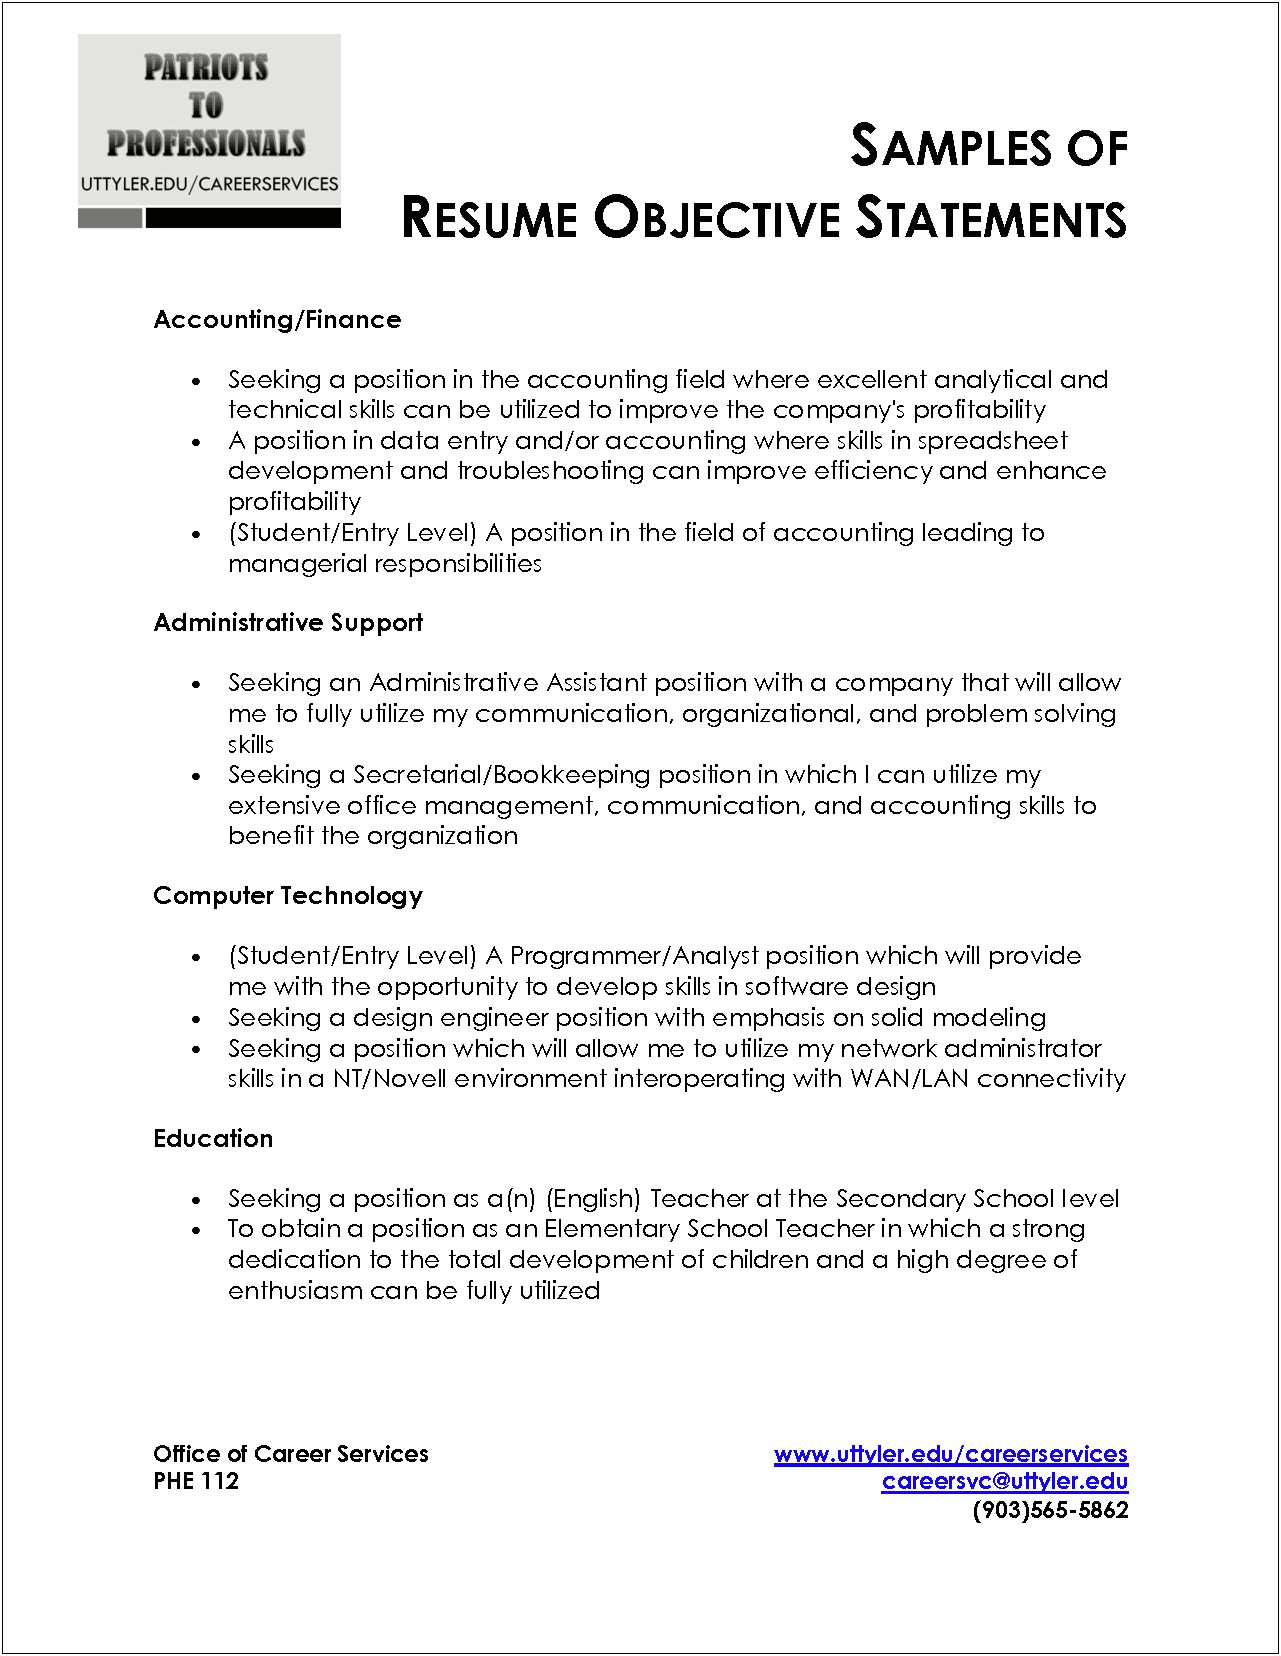 Objective Statement From The Resume